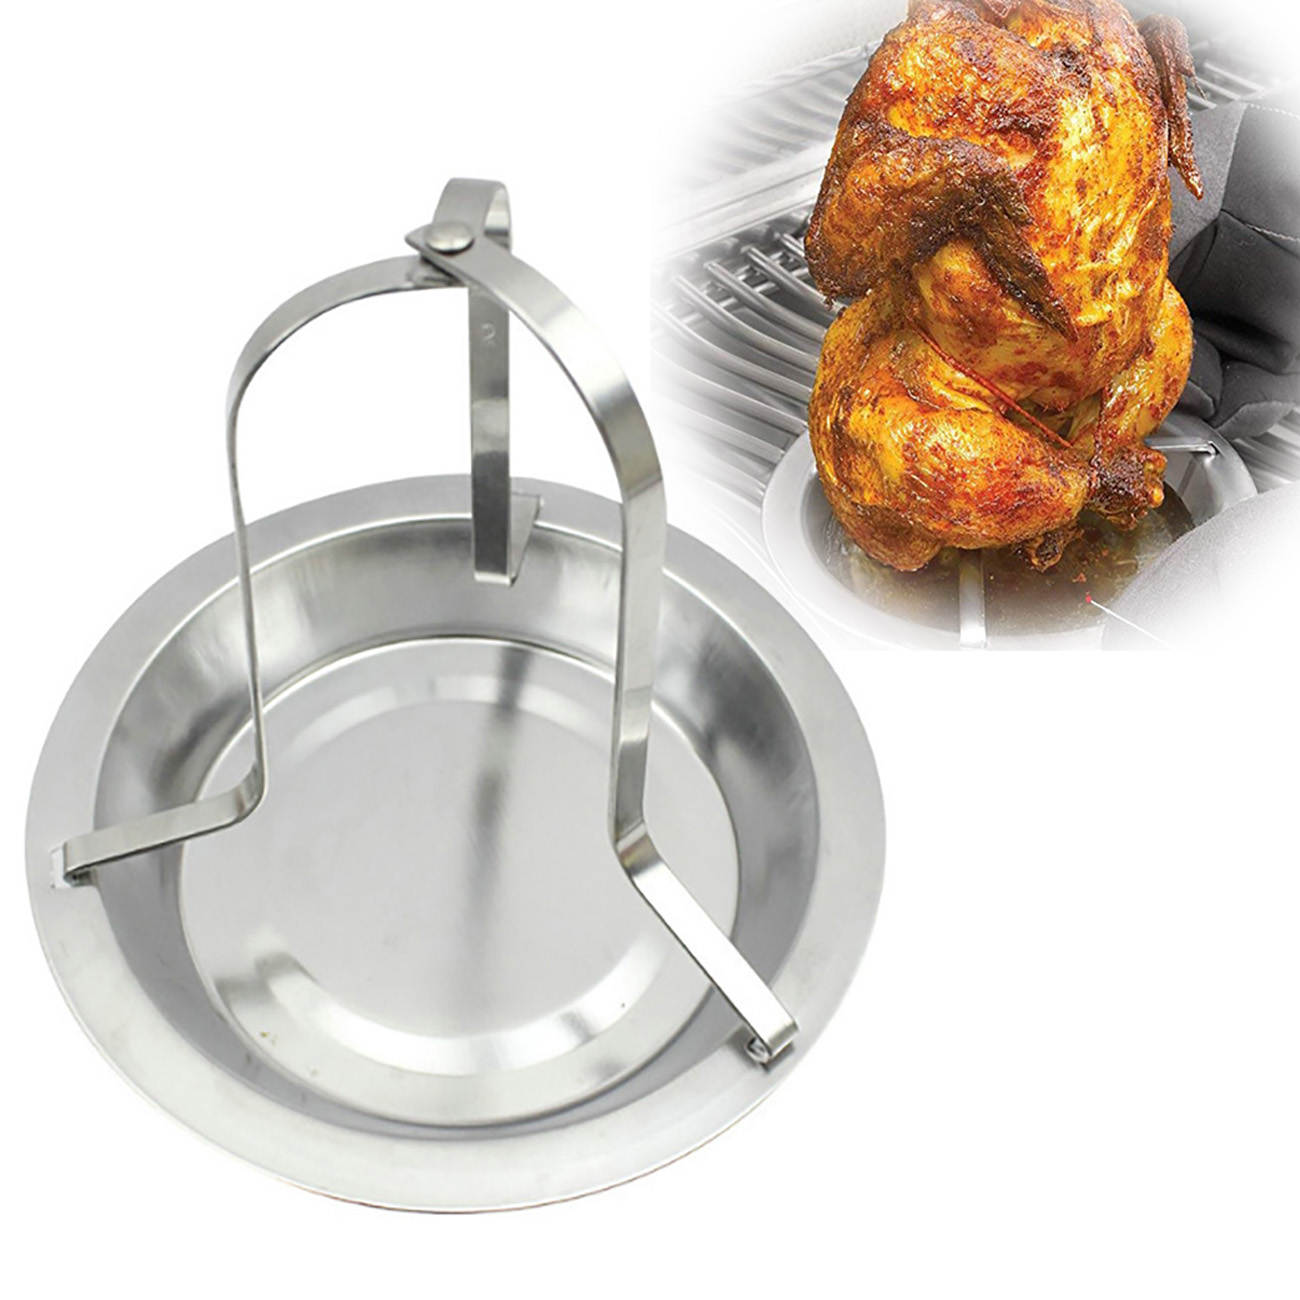 Dishwasher Safe Chicken Duck Grill Holder Beer Can Chicken Roaster Rack Stainless Steel Outdoor Camping Baking Pan Non-Stick Roaster BBQ Stand with Drip Tray for Oven or Barbecue